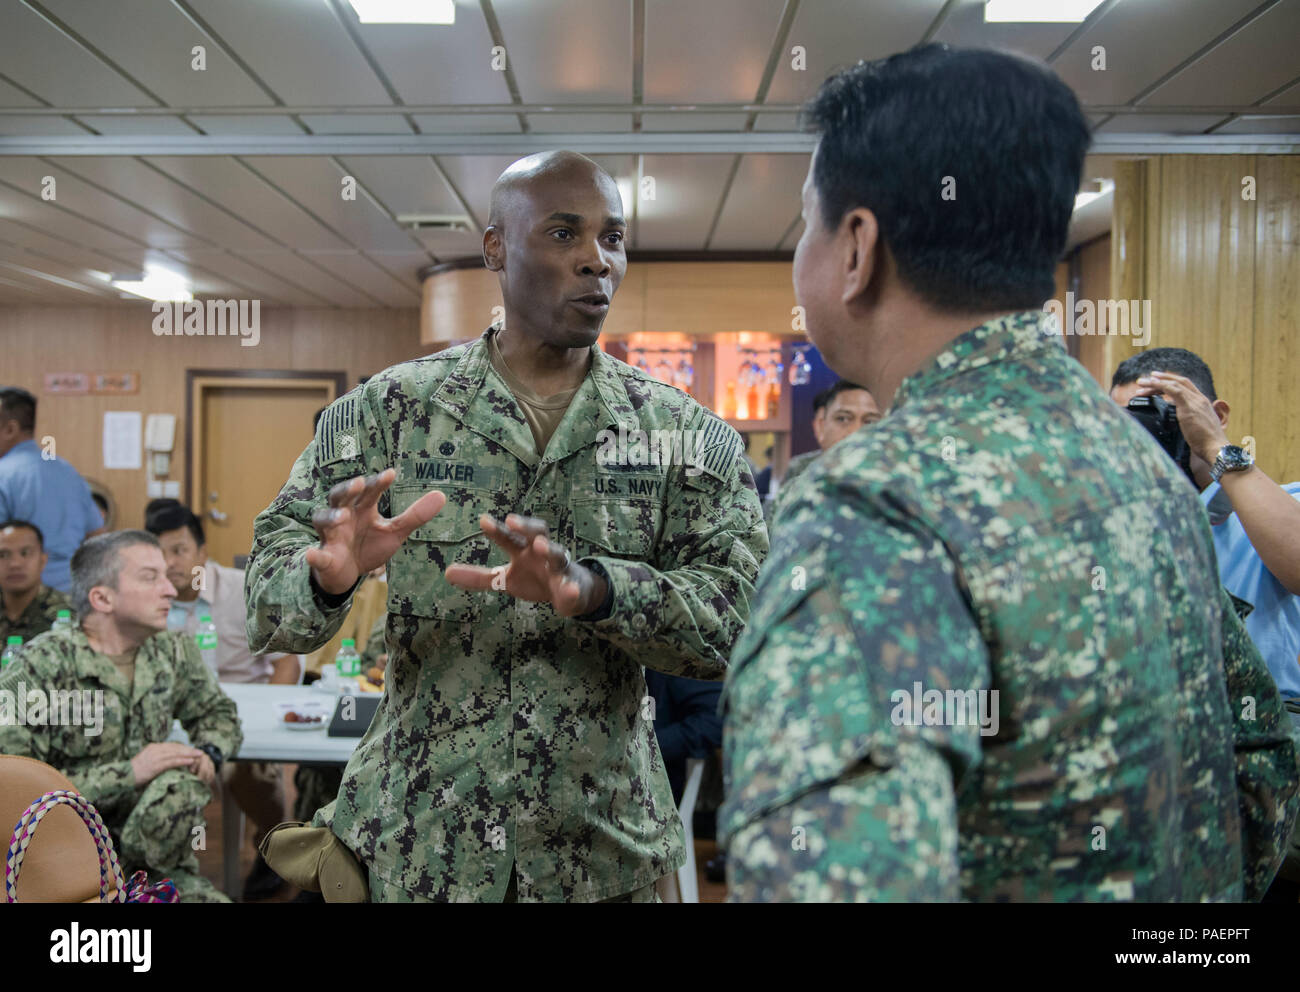 180714-N-OU129-251 SAN FERNANDO CITY, Philippines (July 14, 2018) Capt. Lex Walker, Commodore, Destroyer Squadron 7, discusses engagement activities with Philippine Navy Commodore Nichols Driz, Commander, Naval Forces Northern Luzon, at the closing ceremony of Maritime Training Activity (MTA) Sama Sama 2018 aboard Philippine Navy ship BRP Tarlac (LD-601). The week-long engagement focuses on the full spectrum of naval capabilities and is designed to strengthen the close partnership between both navies while cooperatively ensuring maritime security, stability and prosperity. (U.S. Navy photo by  Stock Photo